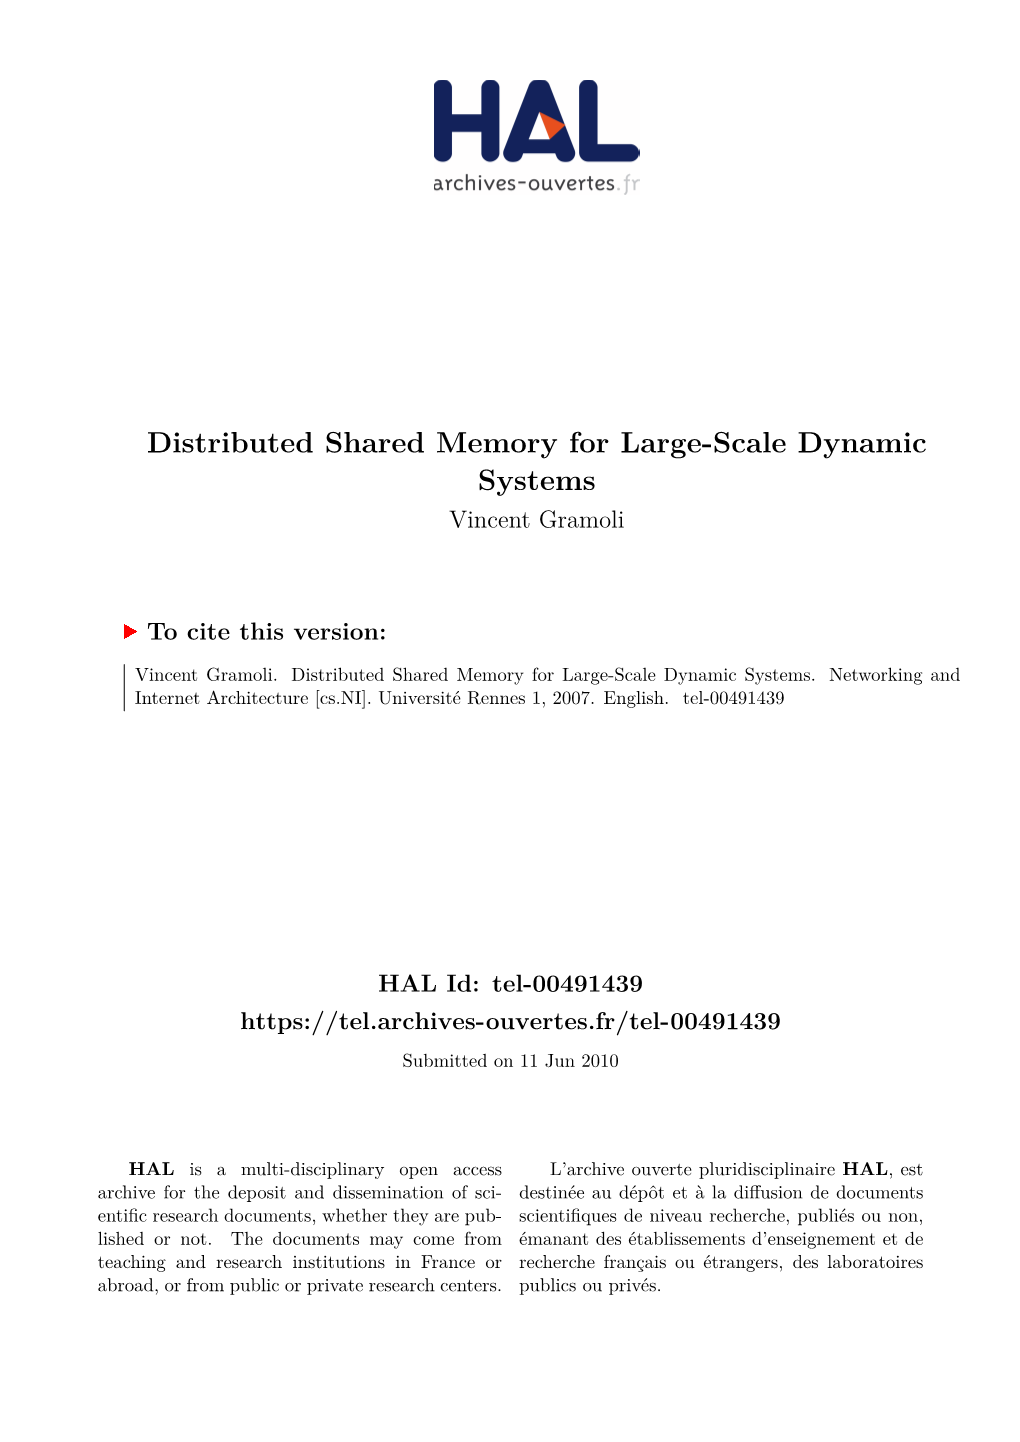 Distributed Shared Memory for Large-Scale Dynamic Systems Vincent Gramoli